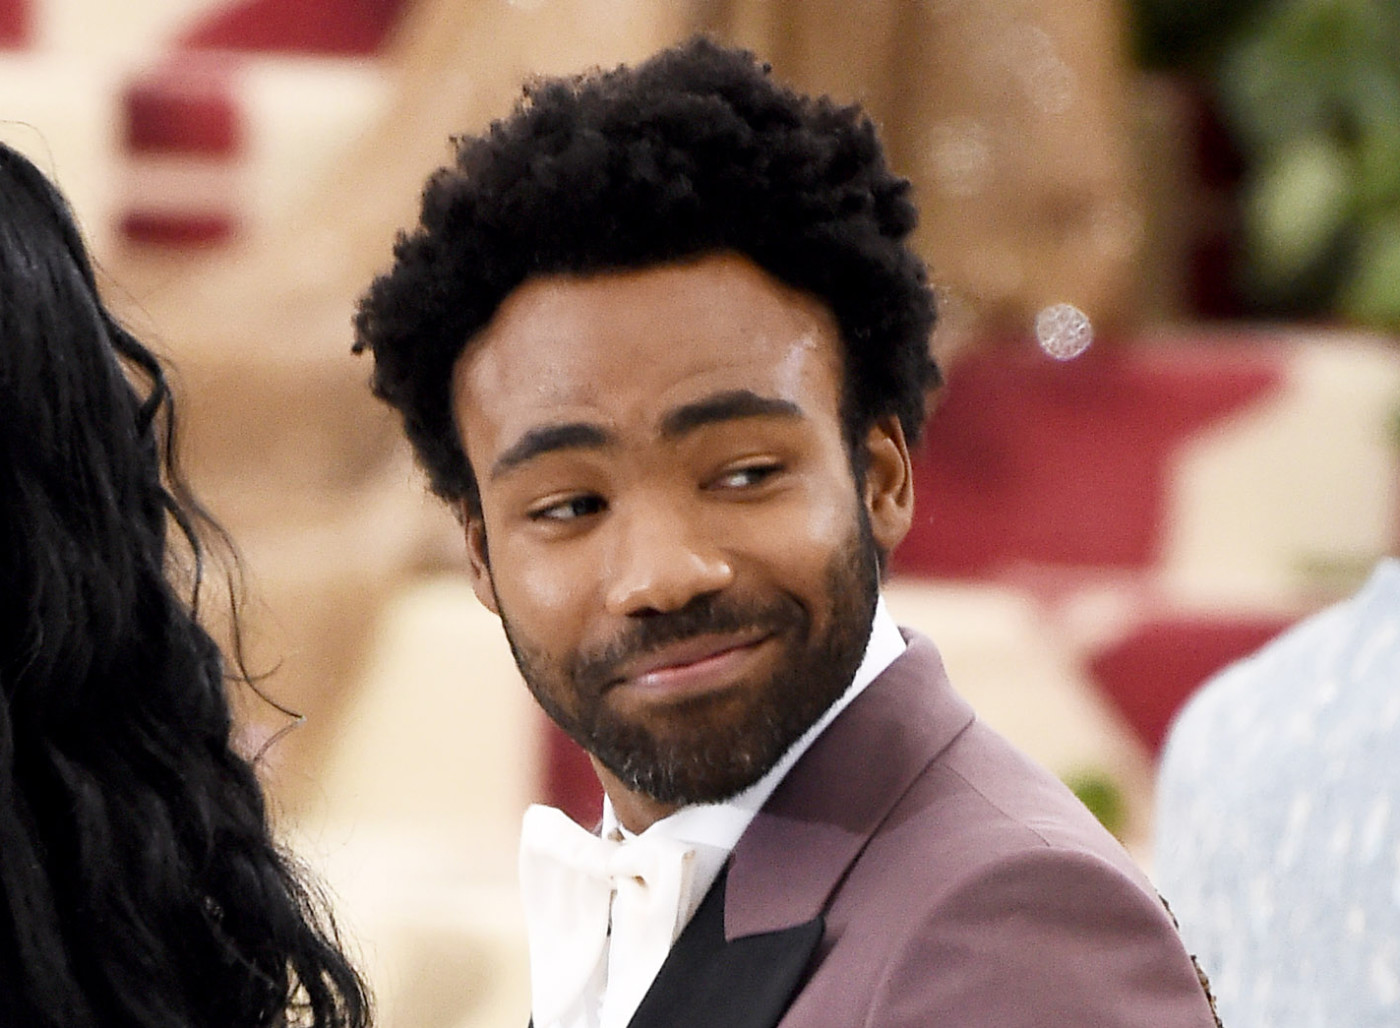 Childish Gambino Wanted to Make a "We Are The World" Song With Rappers